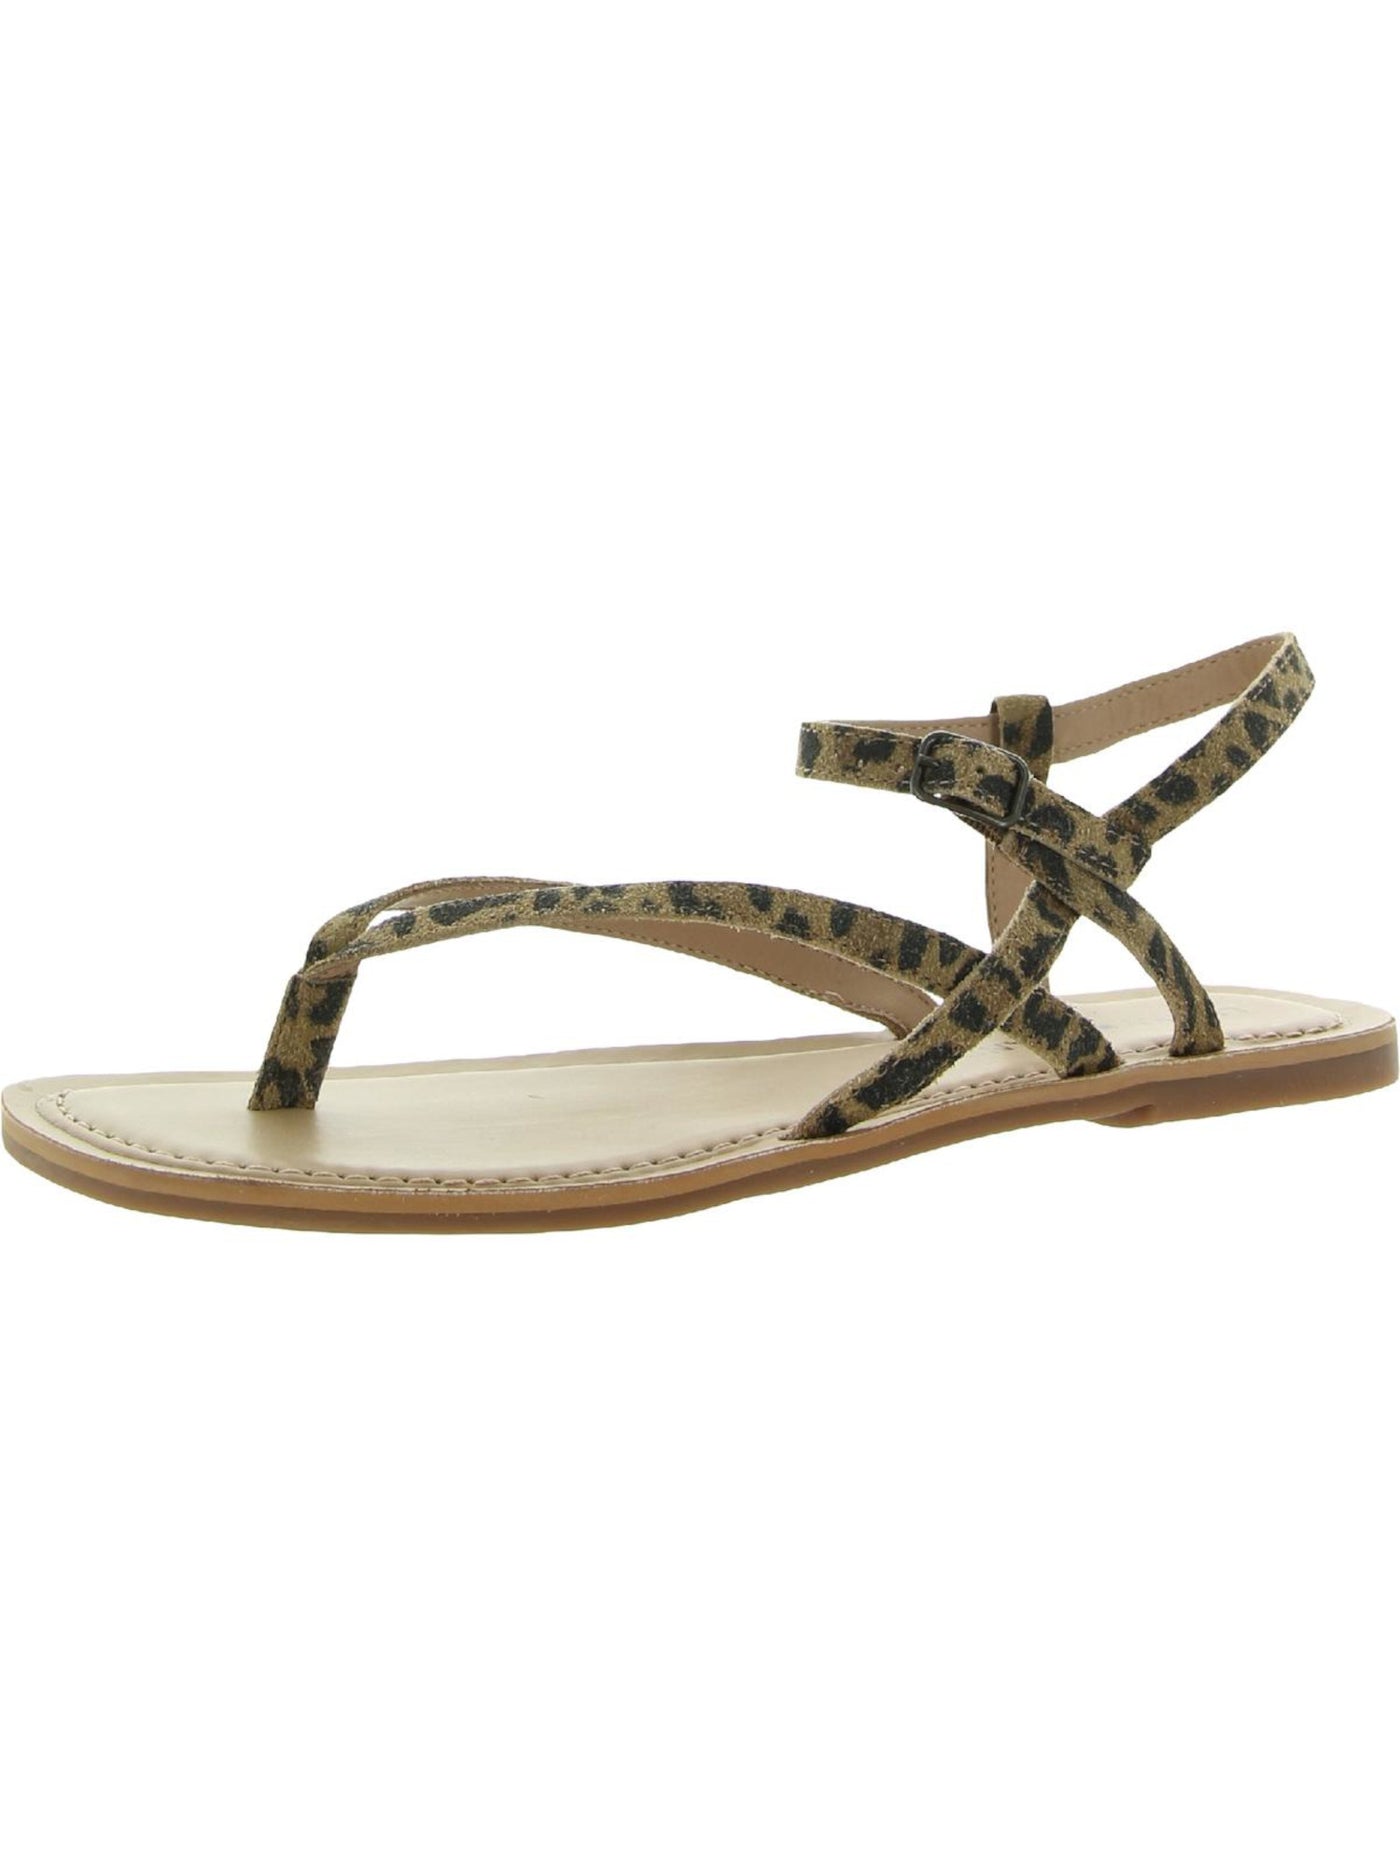 LUCKY BRAND Womens Beige Animal Print Leopard Ankle Strap Comfort Bylee Square Toe Buckle Thong Sandals Shoes 6 M